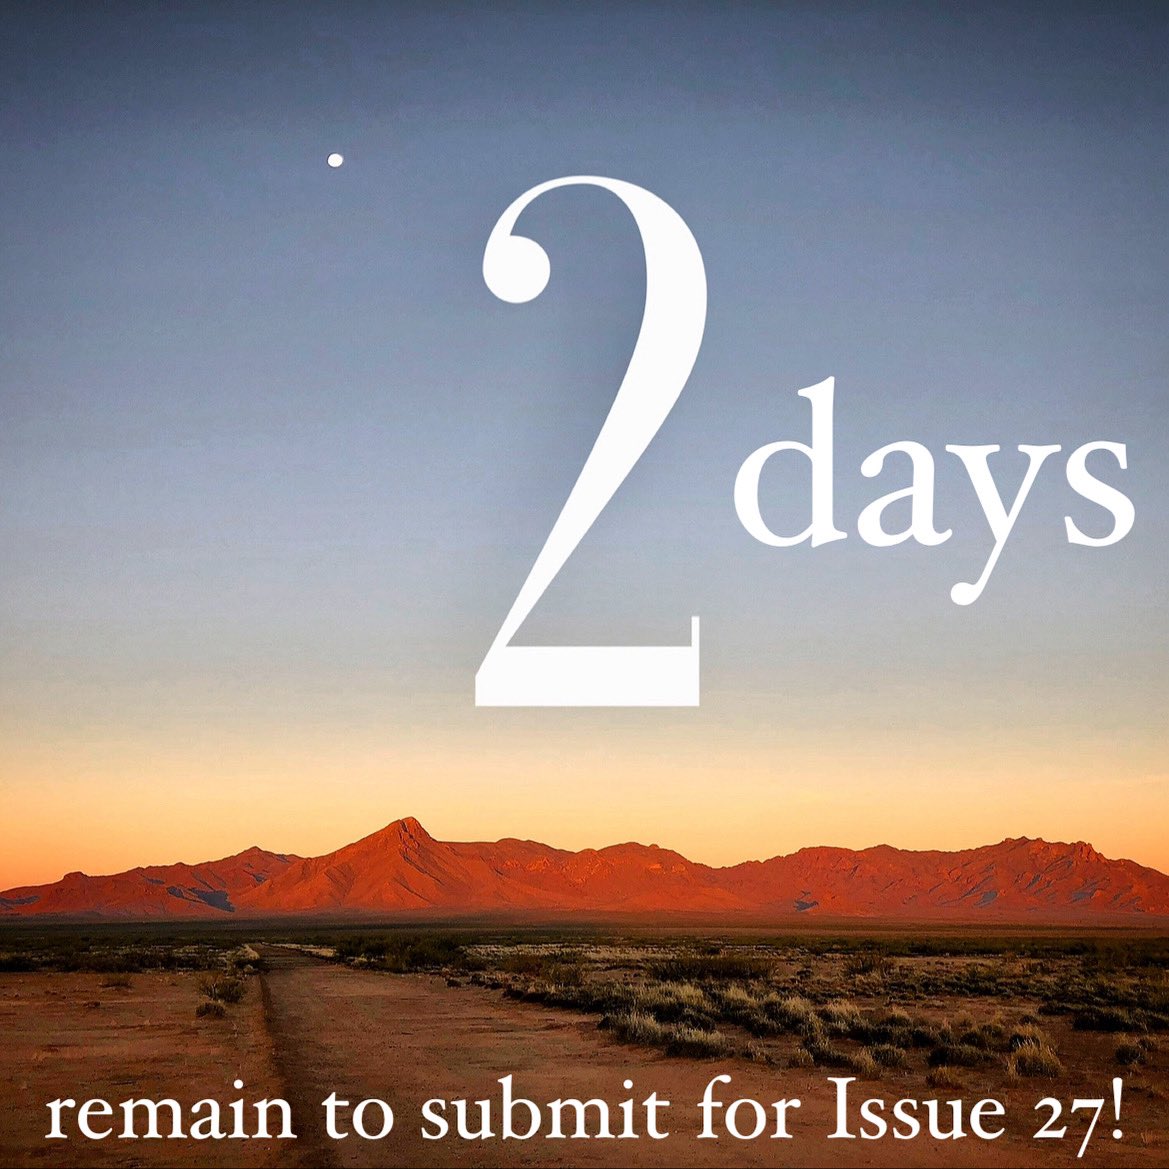 Writers! Submissions for our stunning Issue 27 close at midnight (MST) on December 31st. 

🌄 skyislandjournal.com 🌄

#skyislandjournal #literaryjournal #litmag #poetry #flashfiction #fiction #creativenonfiction #writersofinstagram #callforsubmissions #writingcommunity